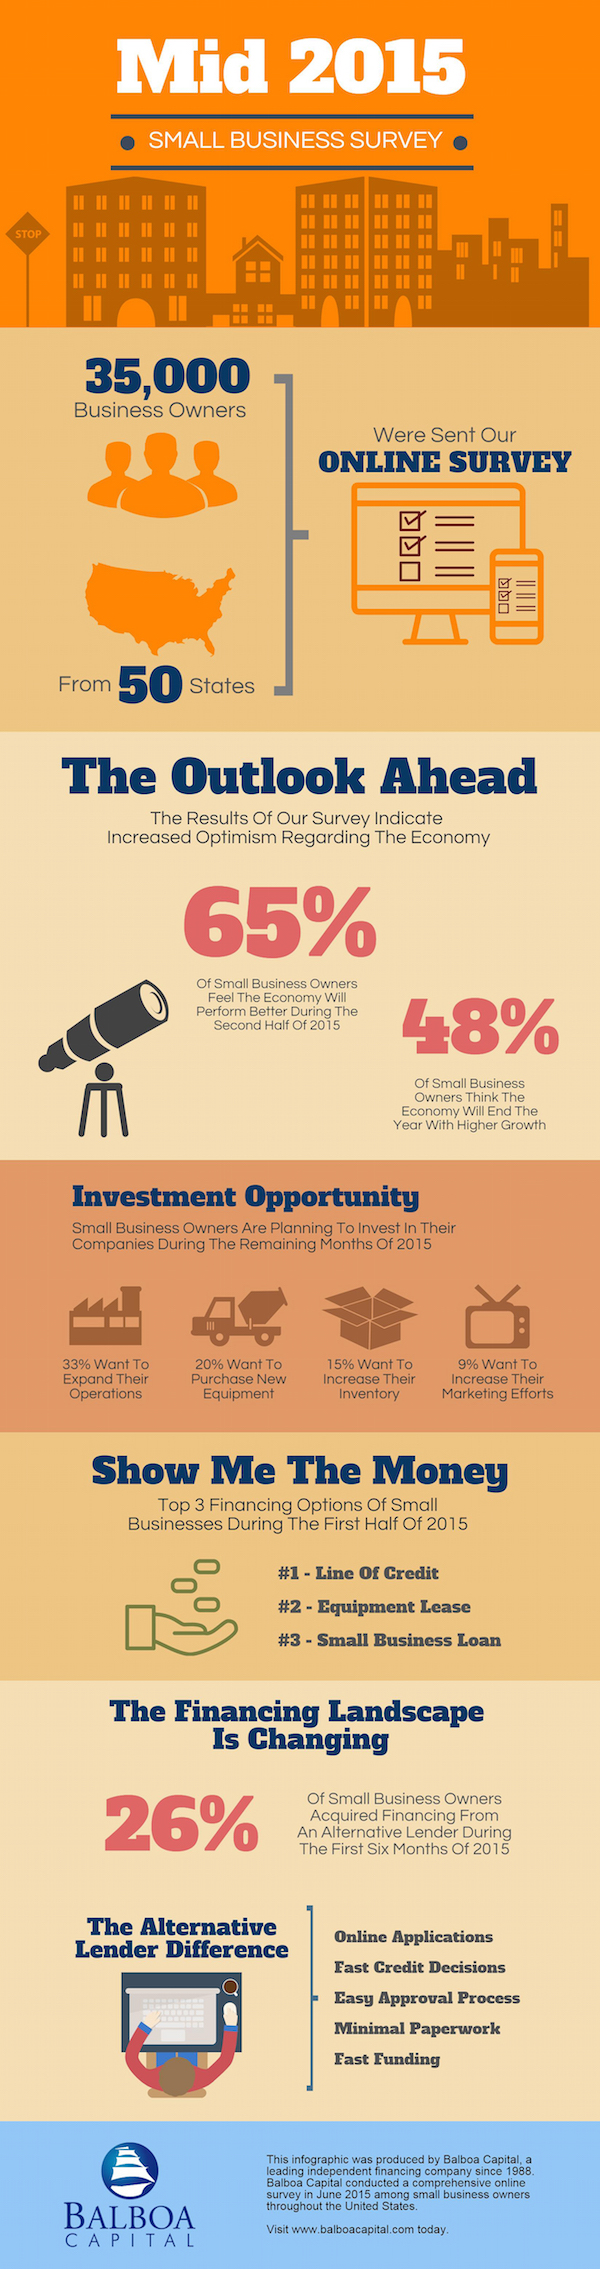 business survey infographic